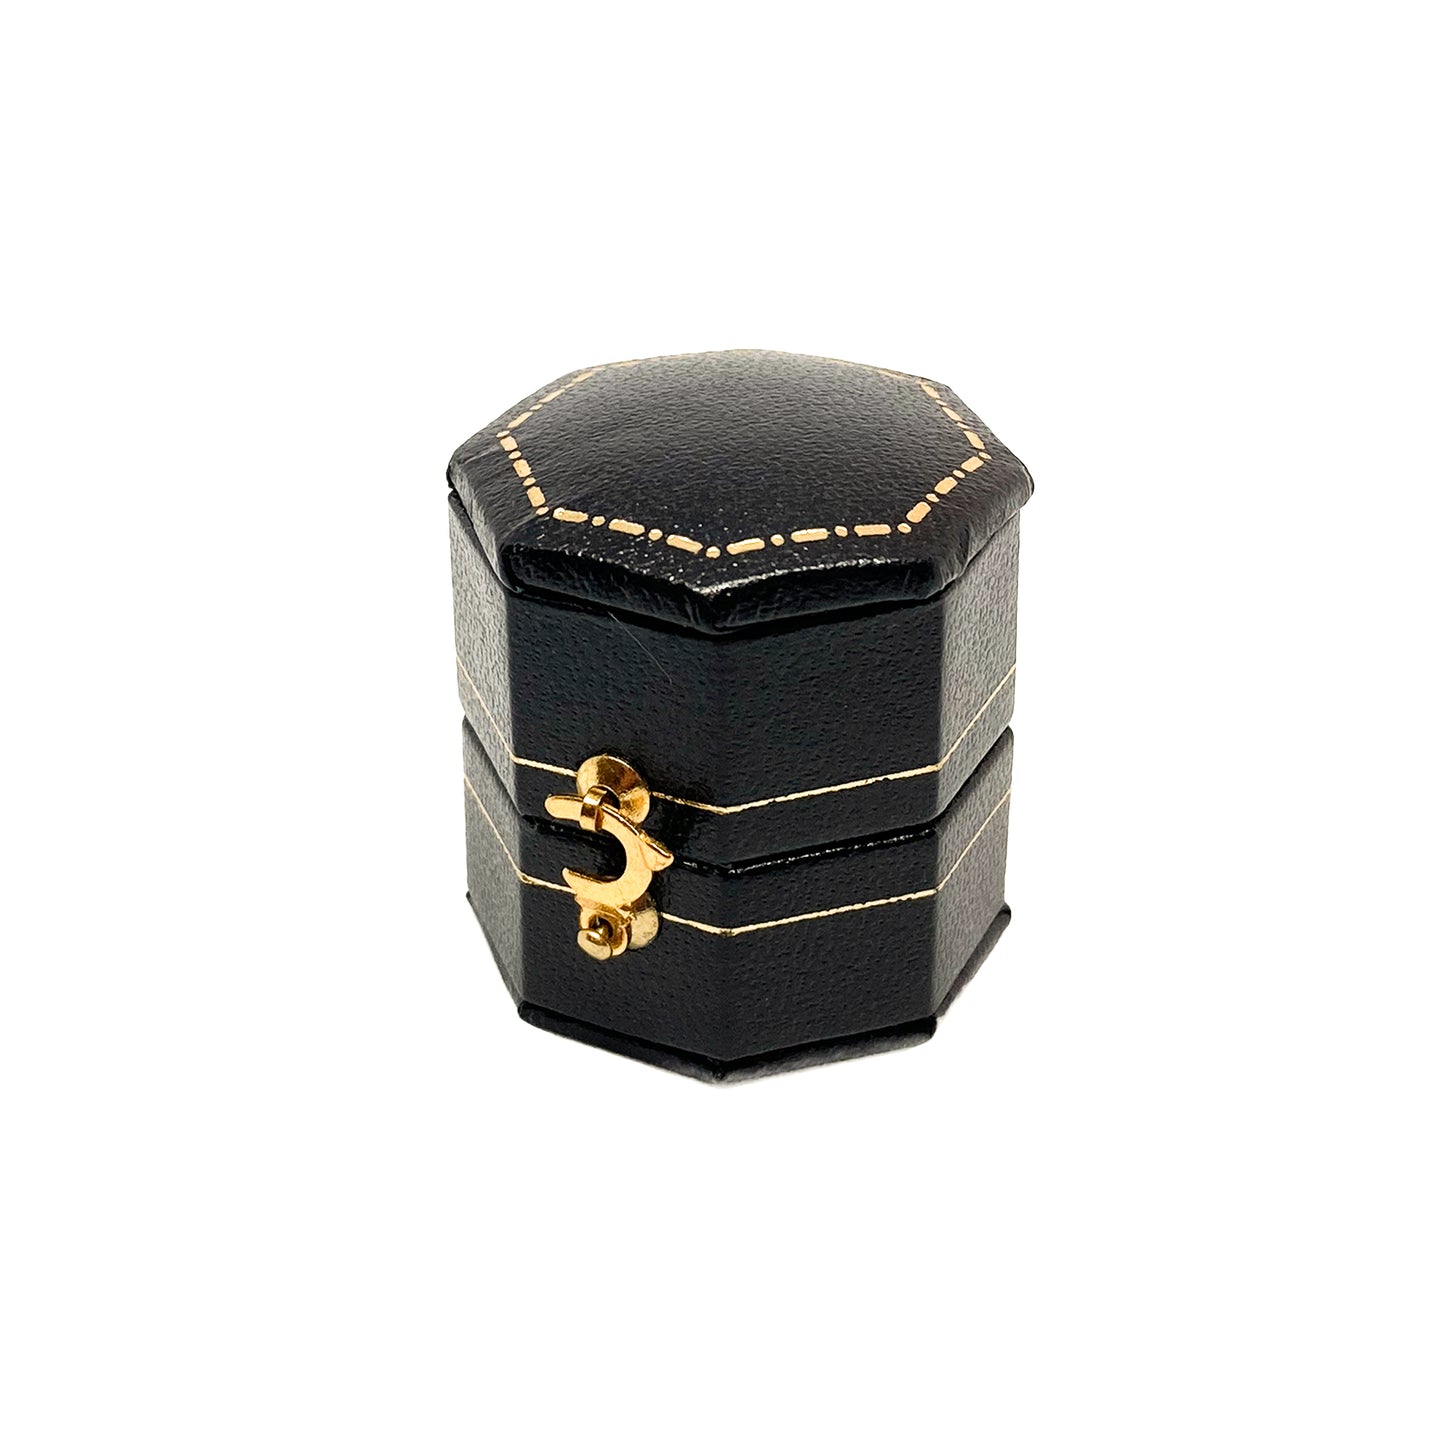 Venice Ring Octagonal Boxes (Pack of 6)